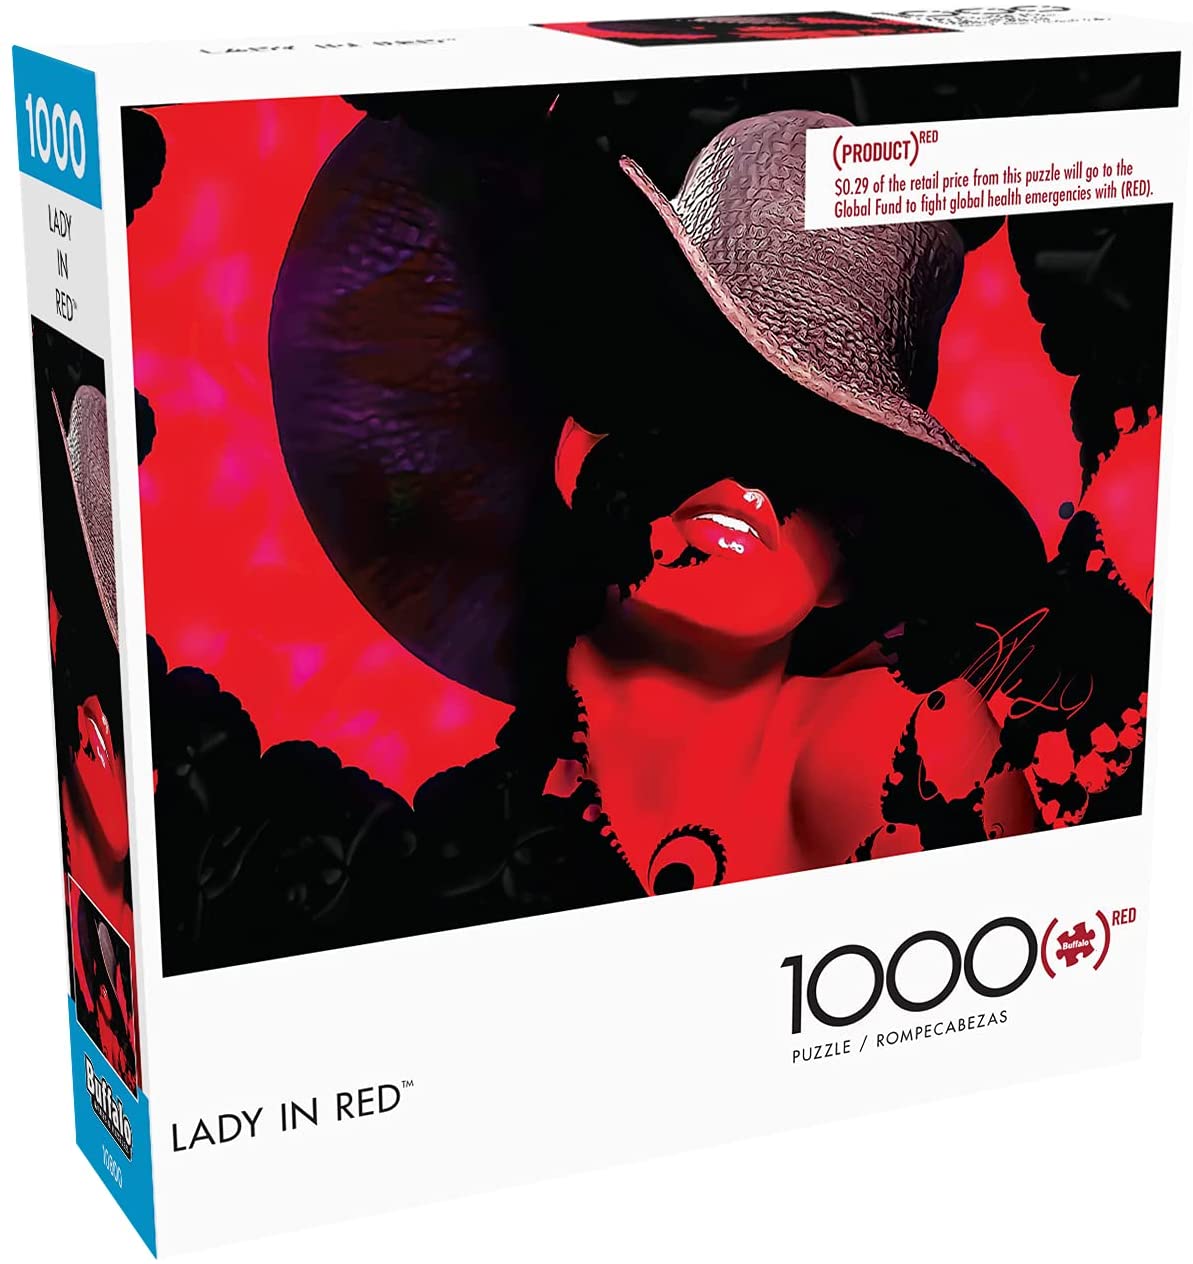 1000-Piece Buffalo Games Lady in Red Jigsaw Puzzle $5 & More + FS w/ Amazon Prime or FS on $25+